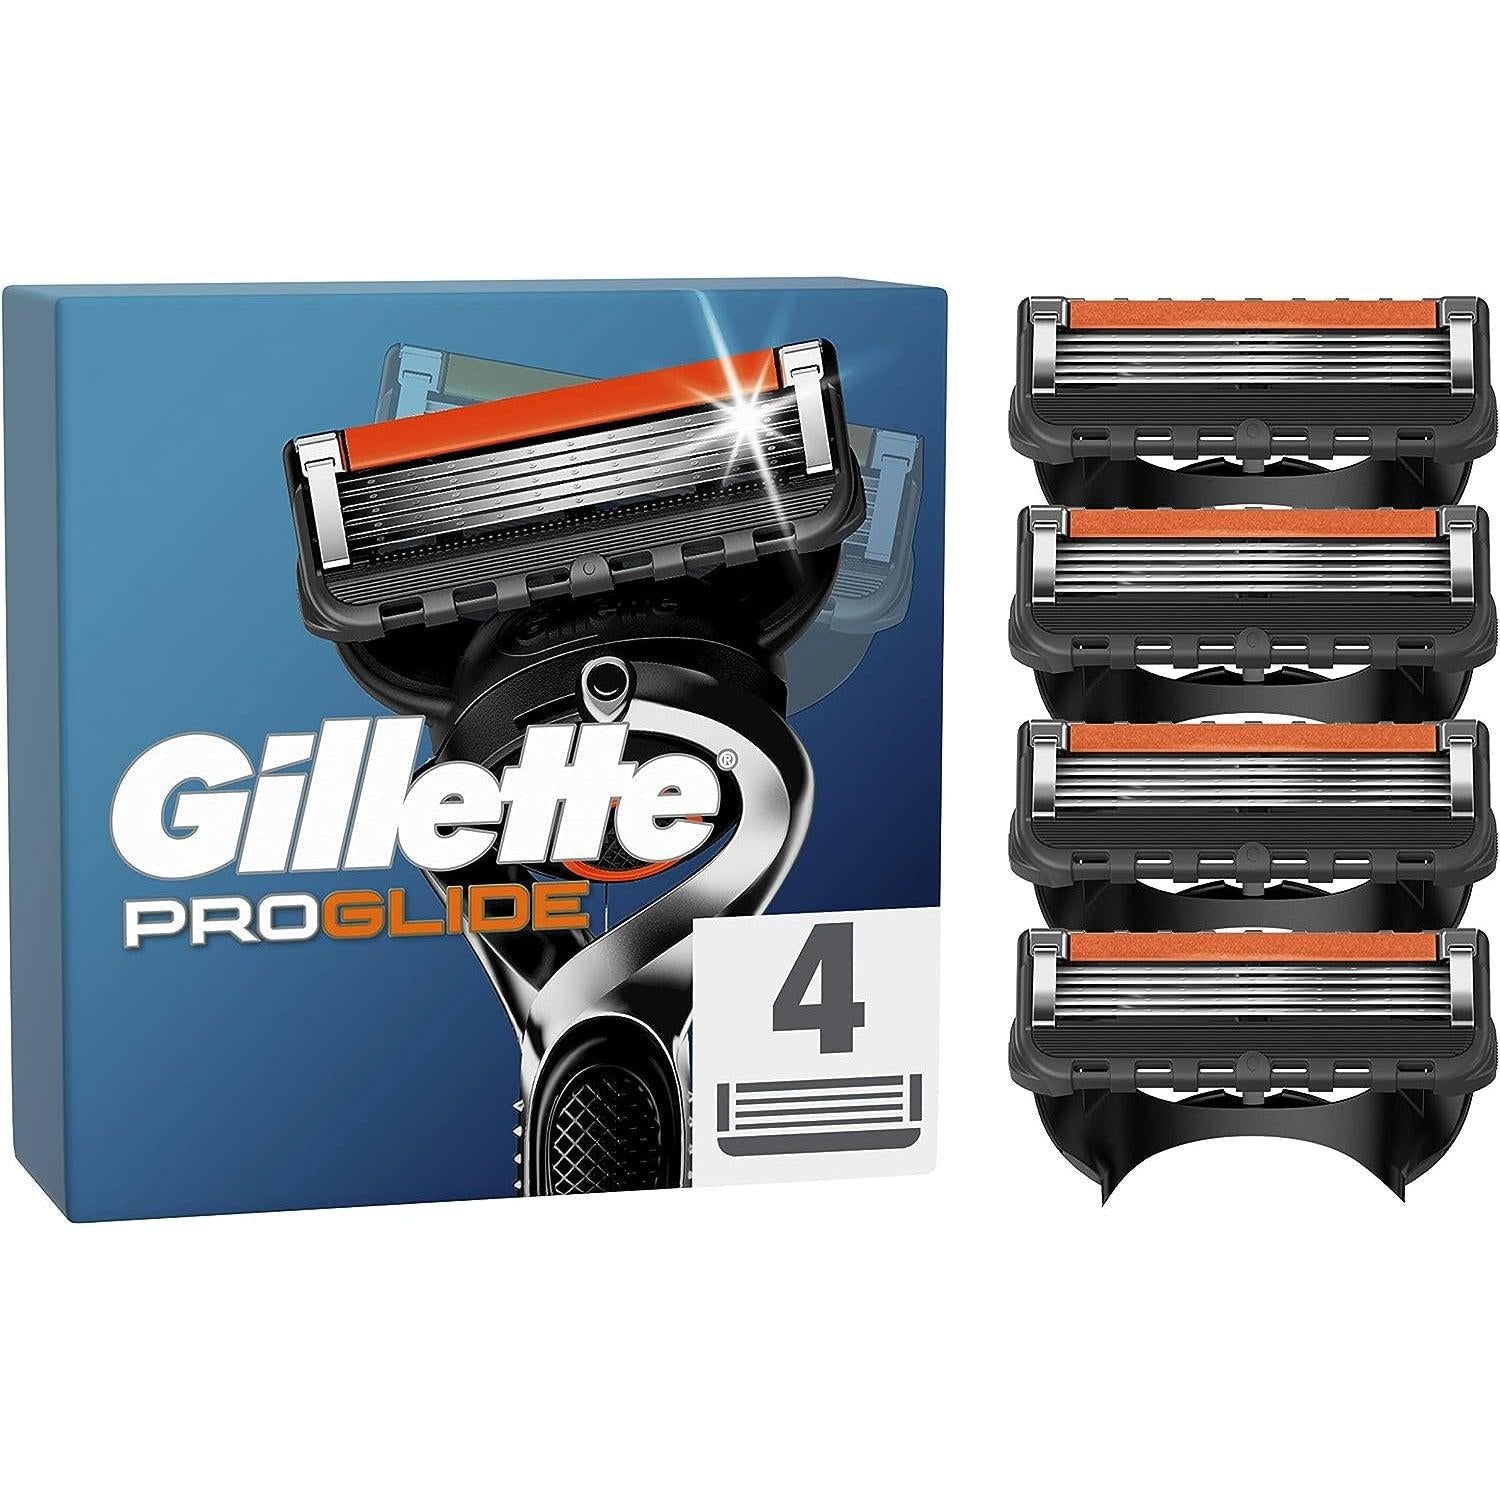 Gillette ProGlide Men’s Razor Blade Refills, 4 Count, with 5 Anti-Friction Blades for a Close, Long-Lasting Shave